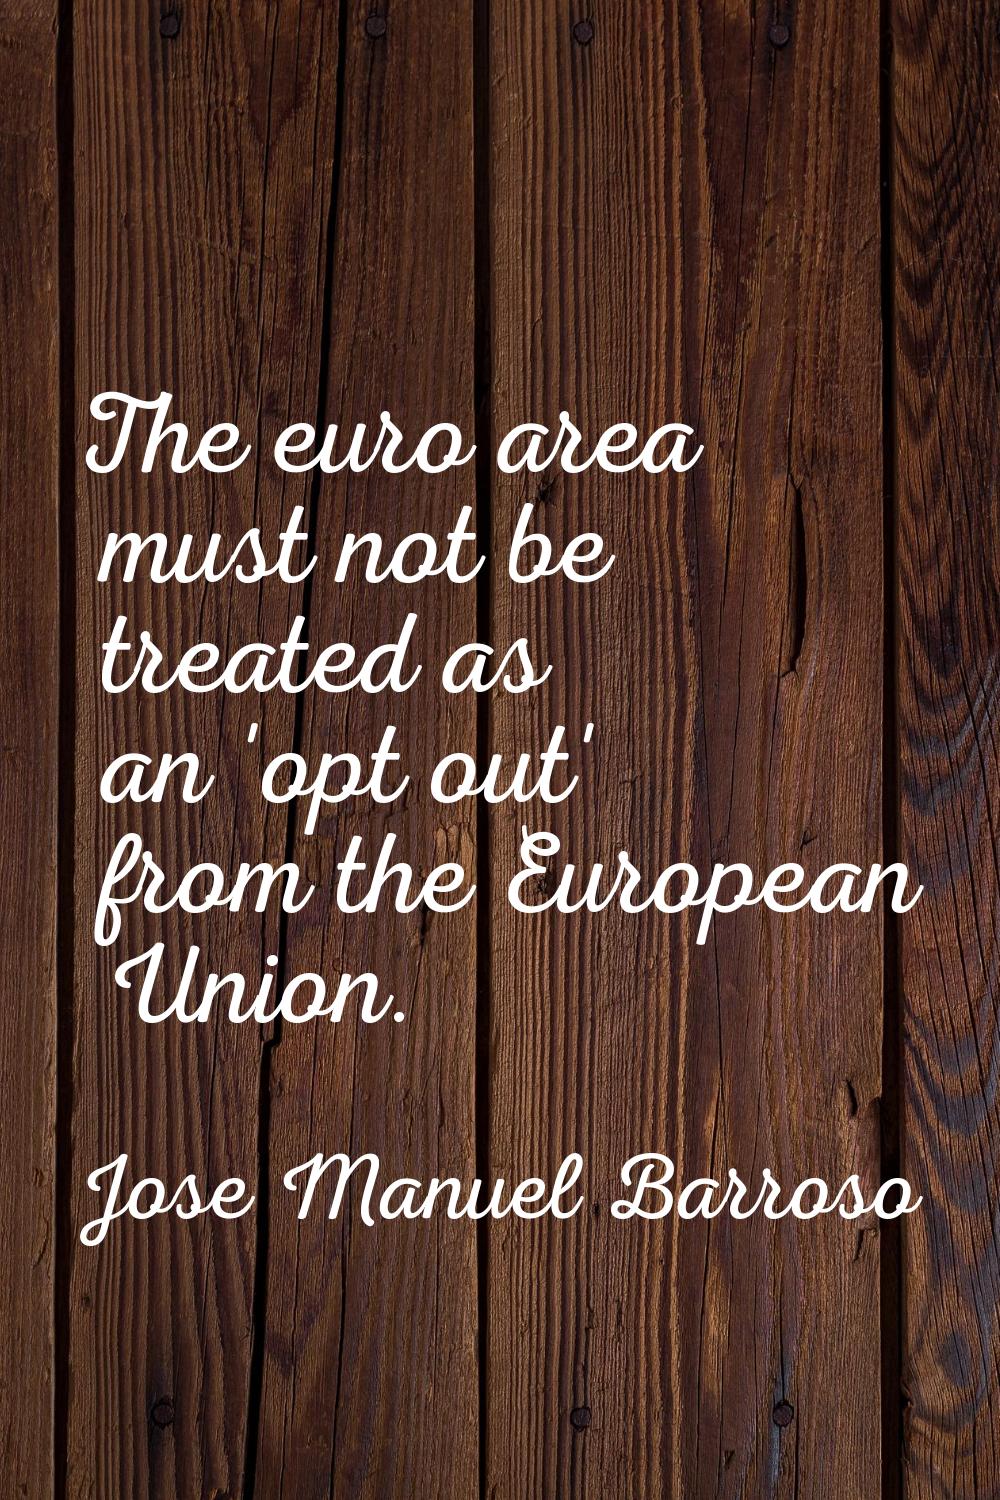 The euro area must not be treated as an 'opt out' from the European Union.